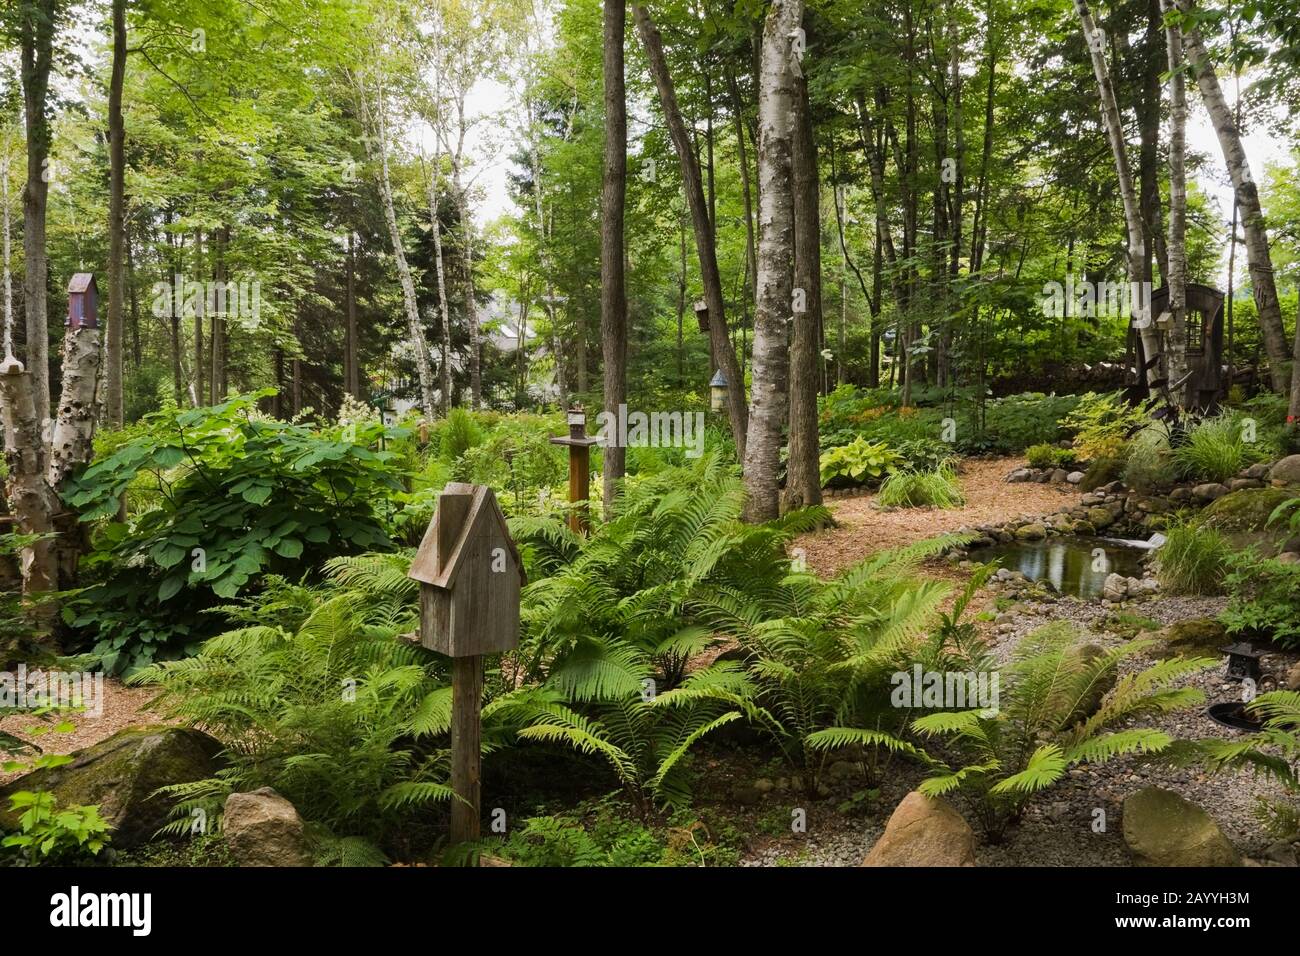 Woodland with birdhouses on tree stumps and Pteridophyta - Ferns in backyard garden in summer. Stock Photo